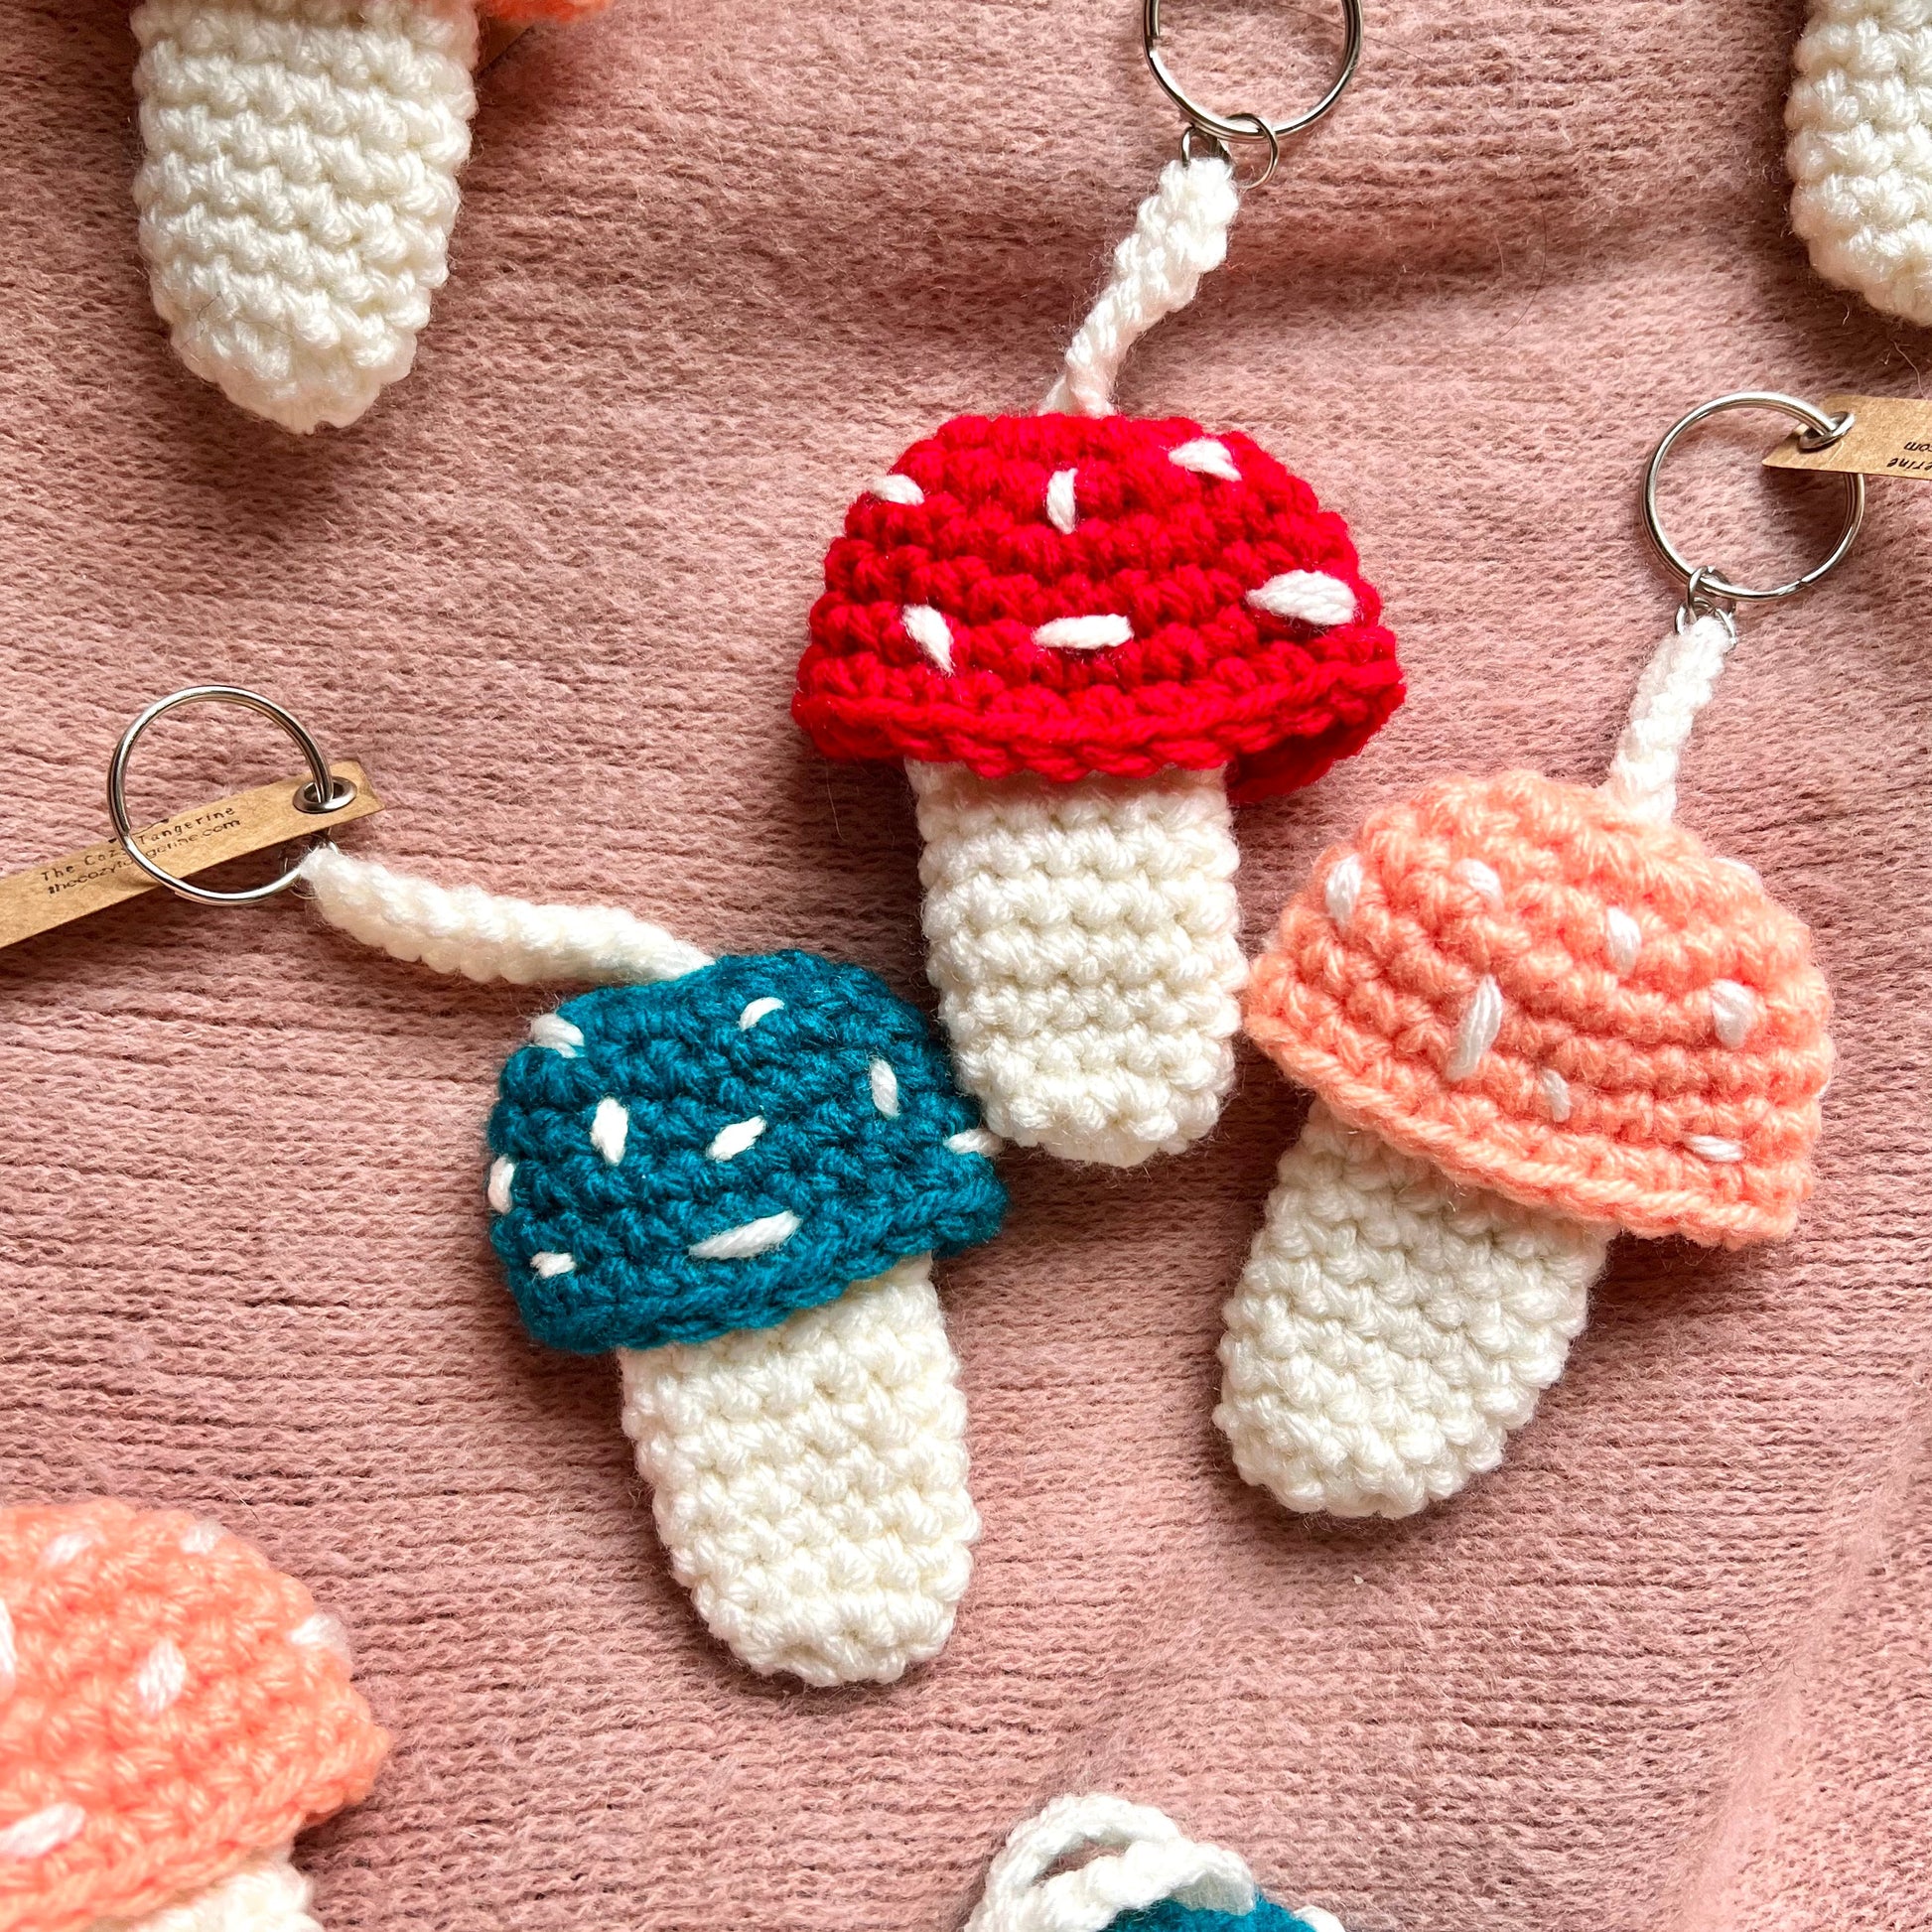 mushroom keychain. holder for chapstick, lighters, tumbled crystals, money and more.